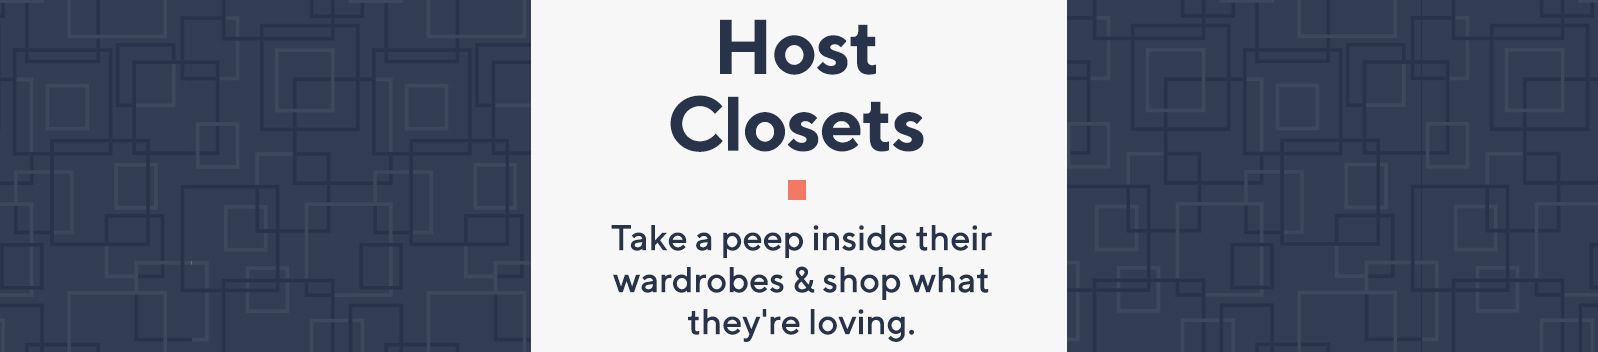 Host Closets  Take a peep inside their wardrobes & shop what they're loving.